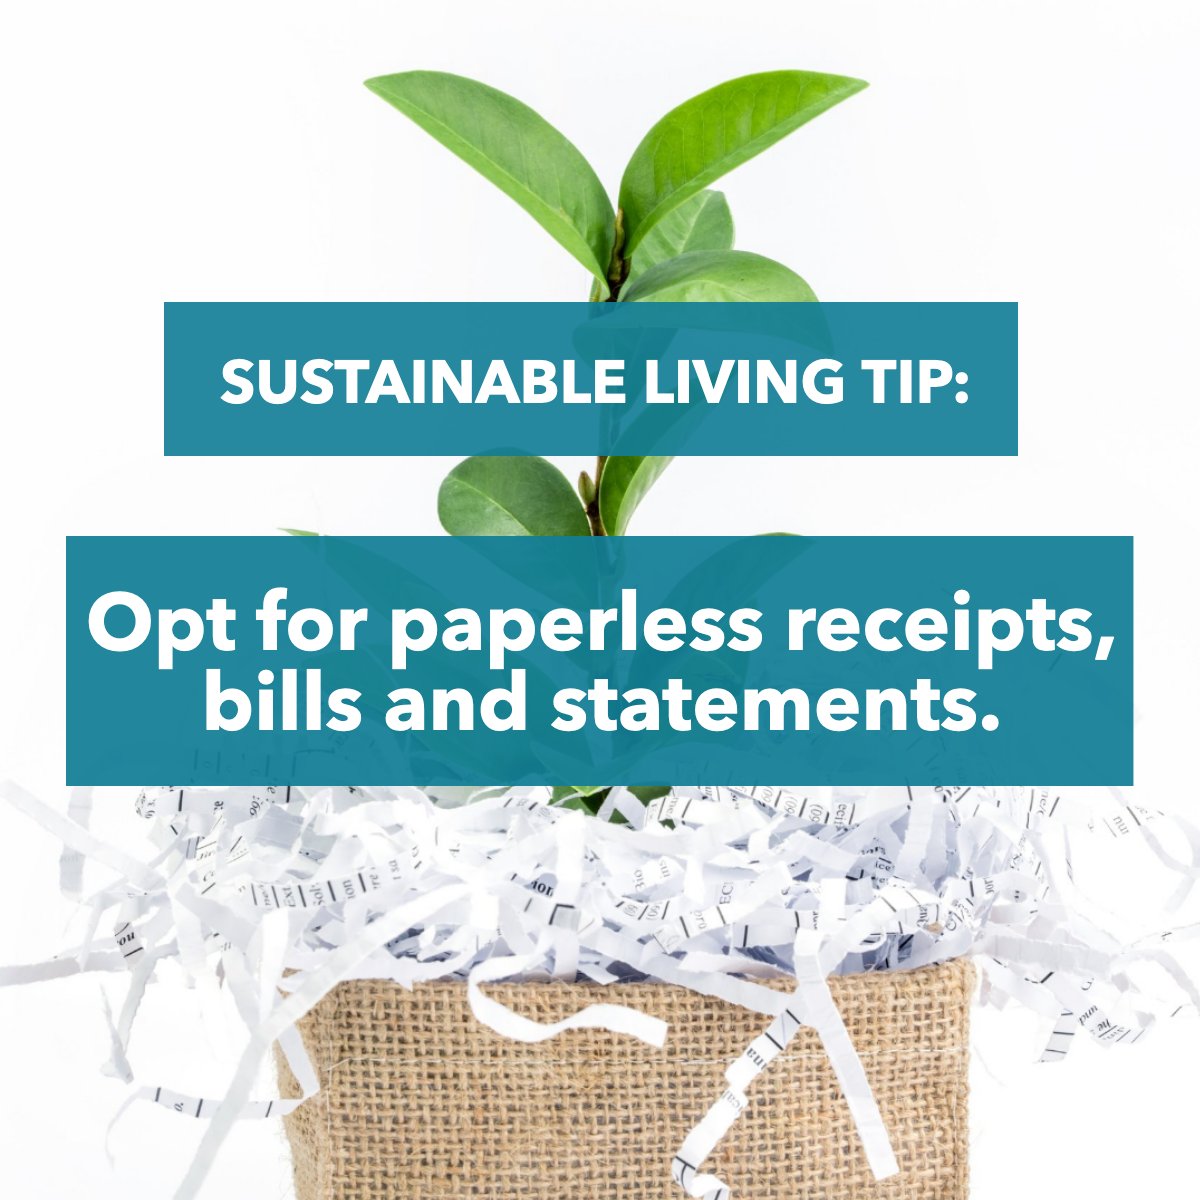 Let's do our part! 

Let's save paper 📄 with this useful tip! 

#green #paperless #sustainableliving #tip
 #firstresponderagents #thecooks #yoursocialagents #prescottrealtors #prescottaz